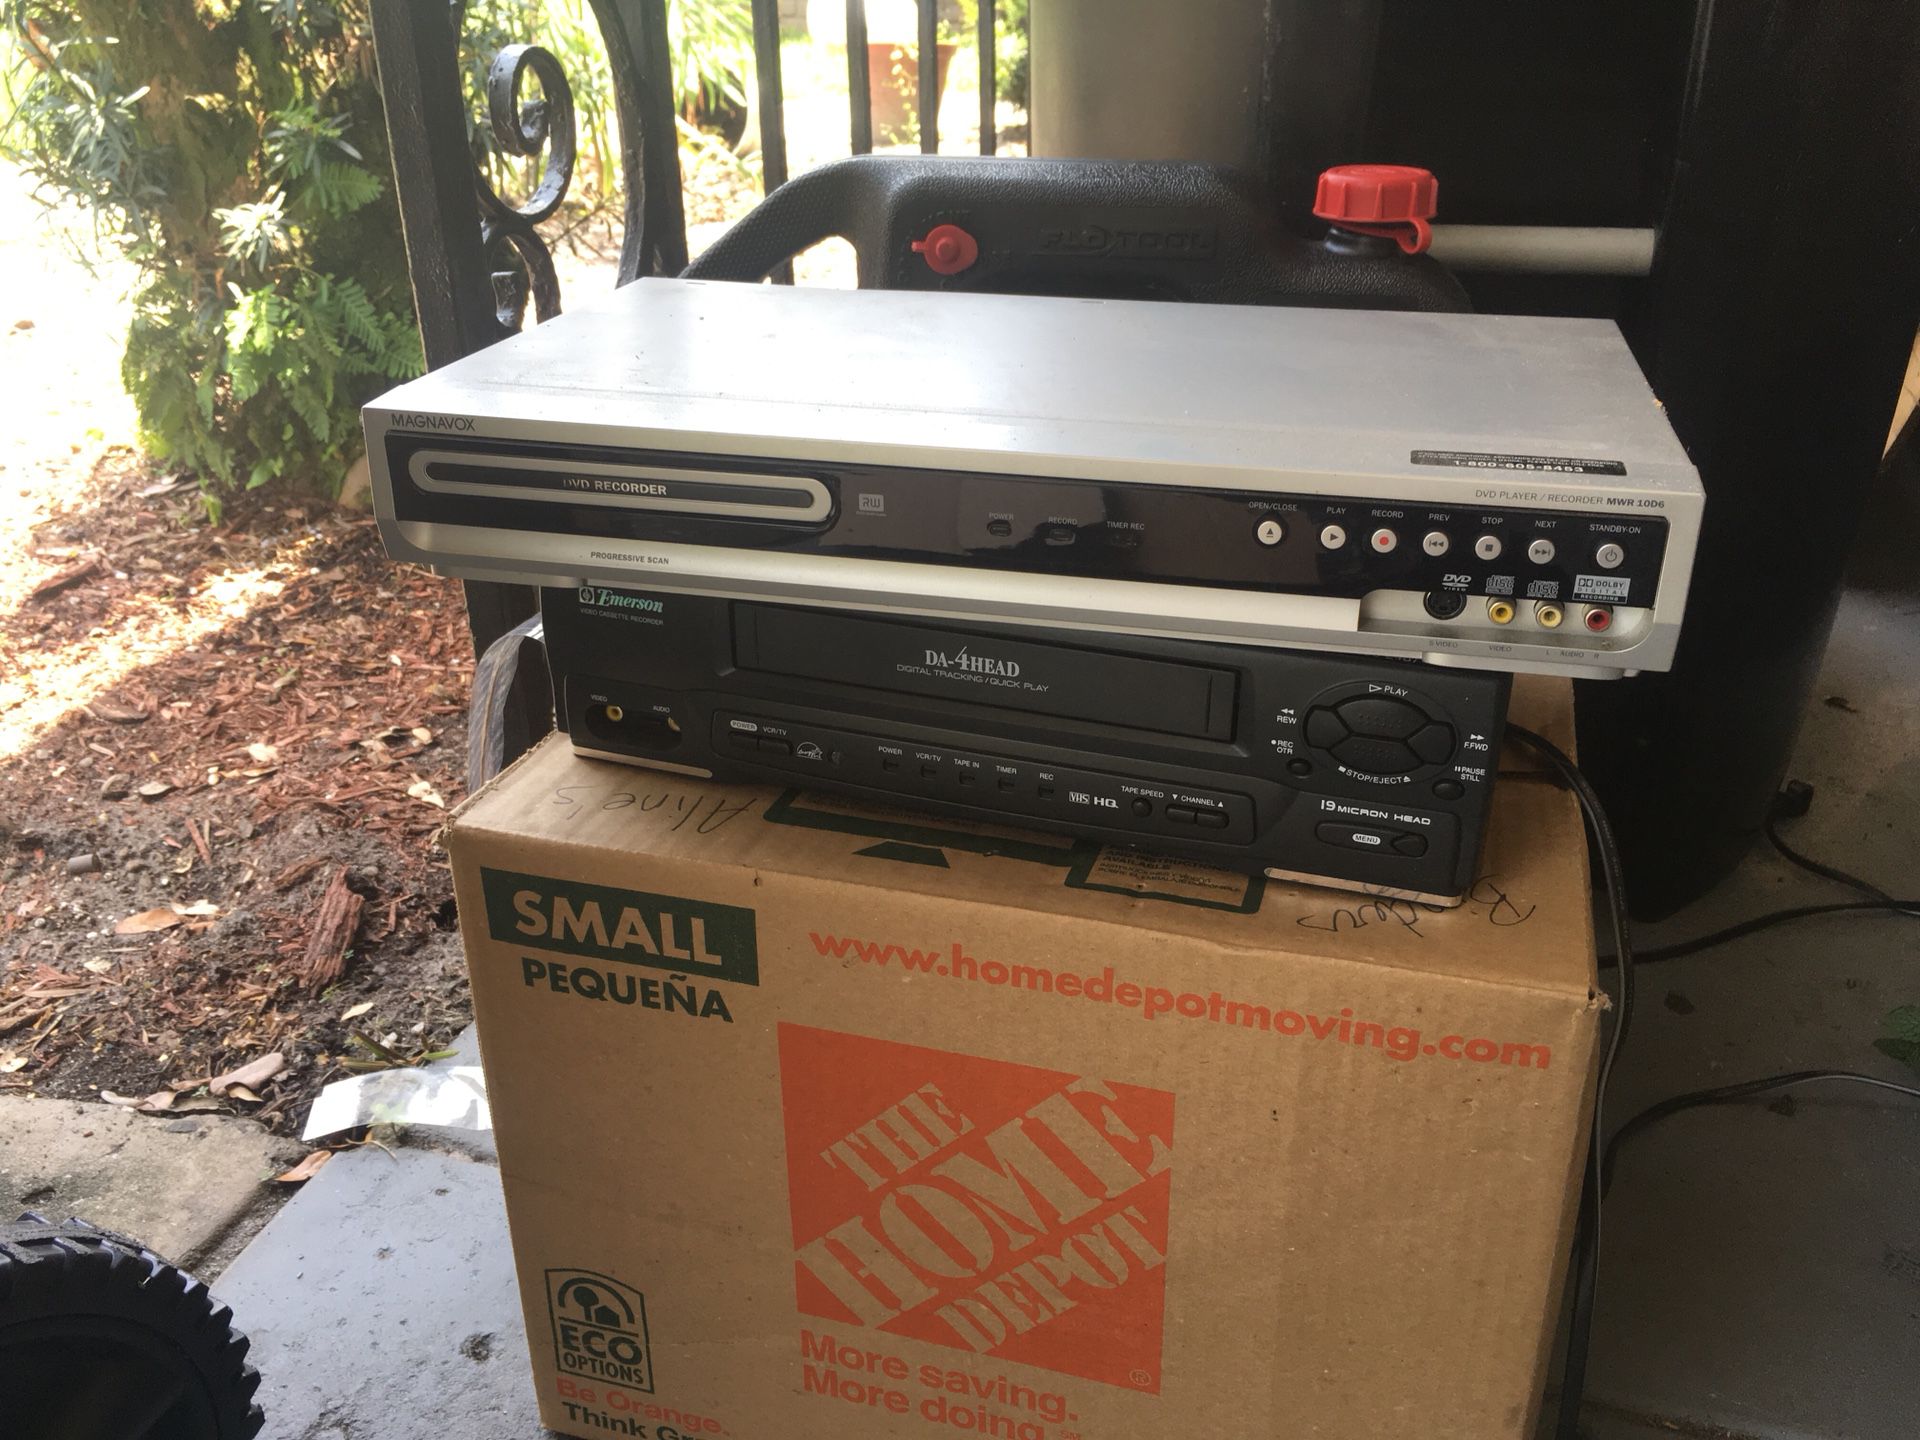 VCR and DVD players